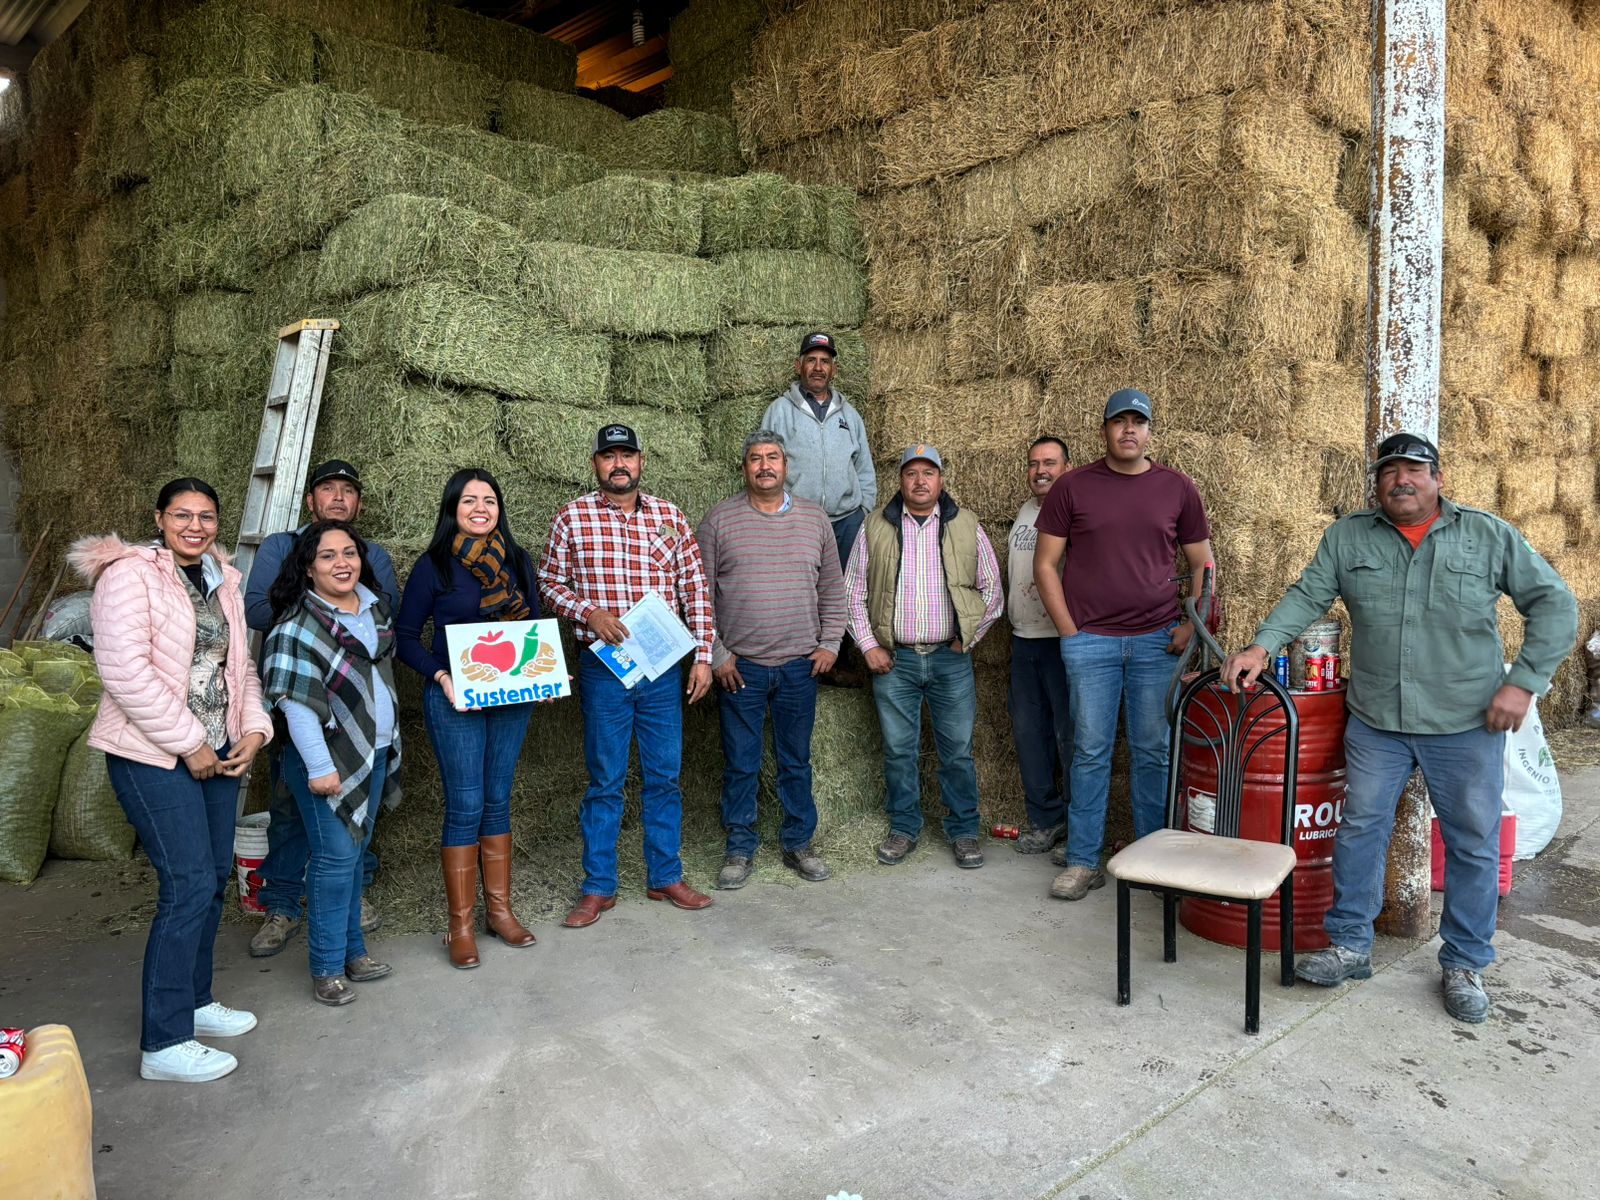 Group photo of people standing in front of a large stack of hay bales. One of them is holding a Sustentar poster.